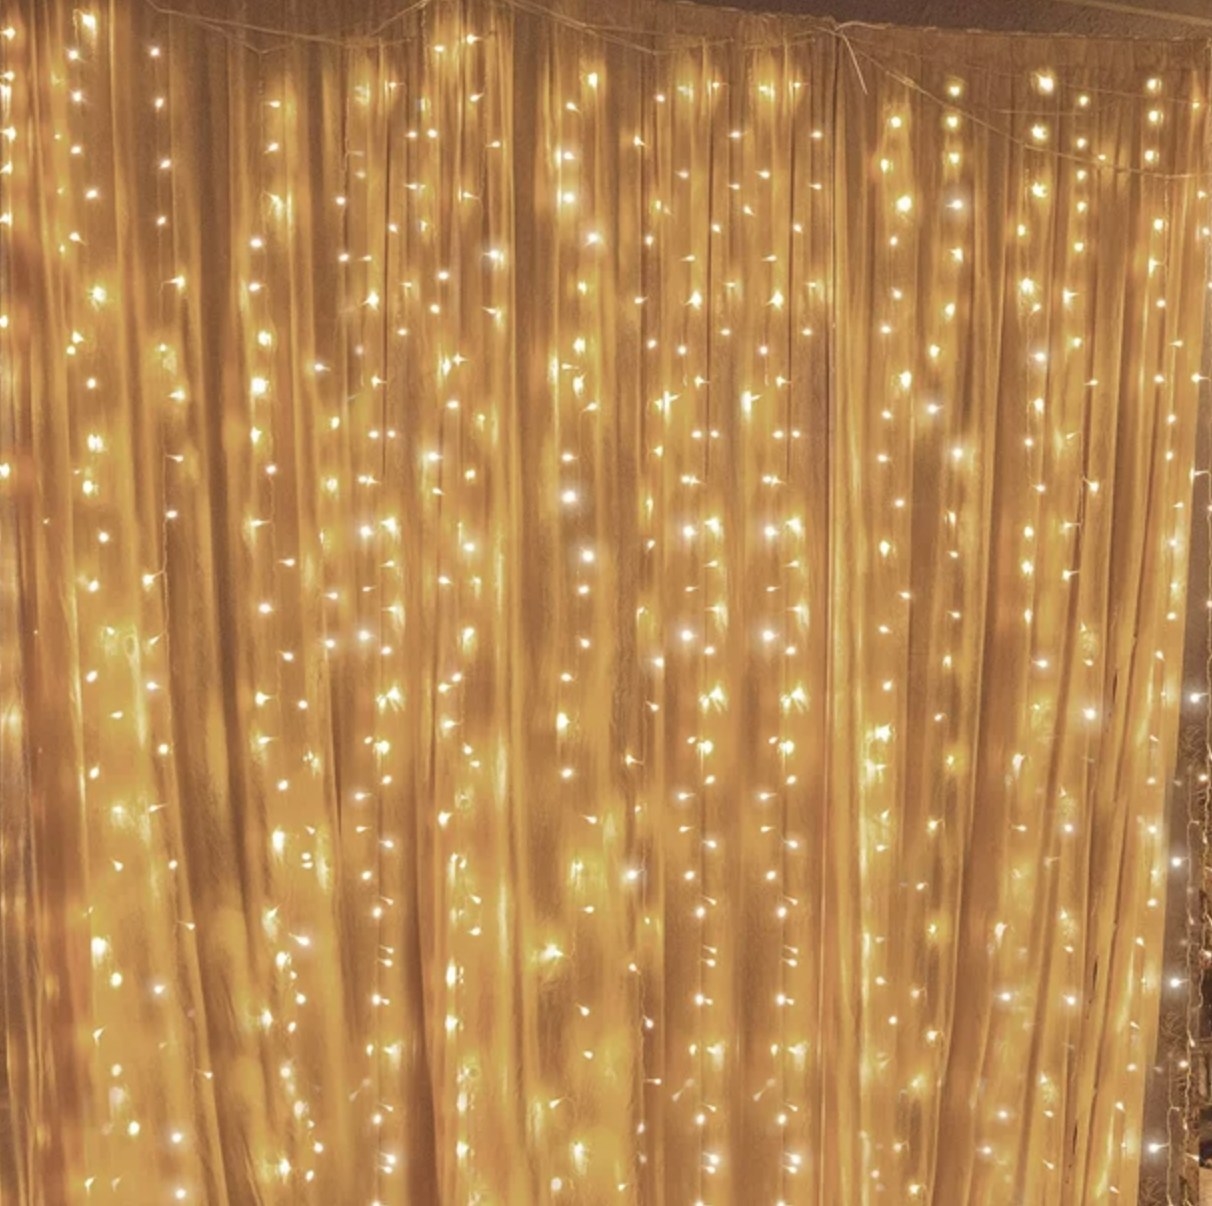 A curtain of twinkly lights hanging